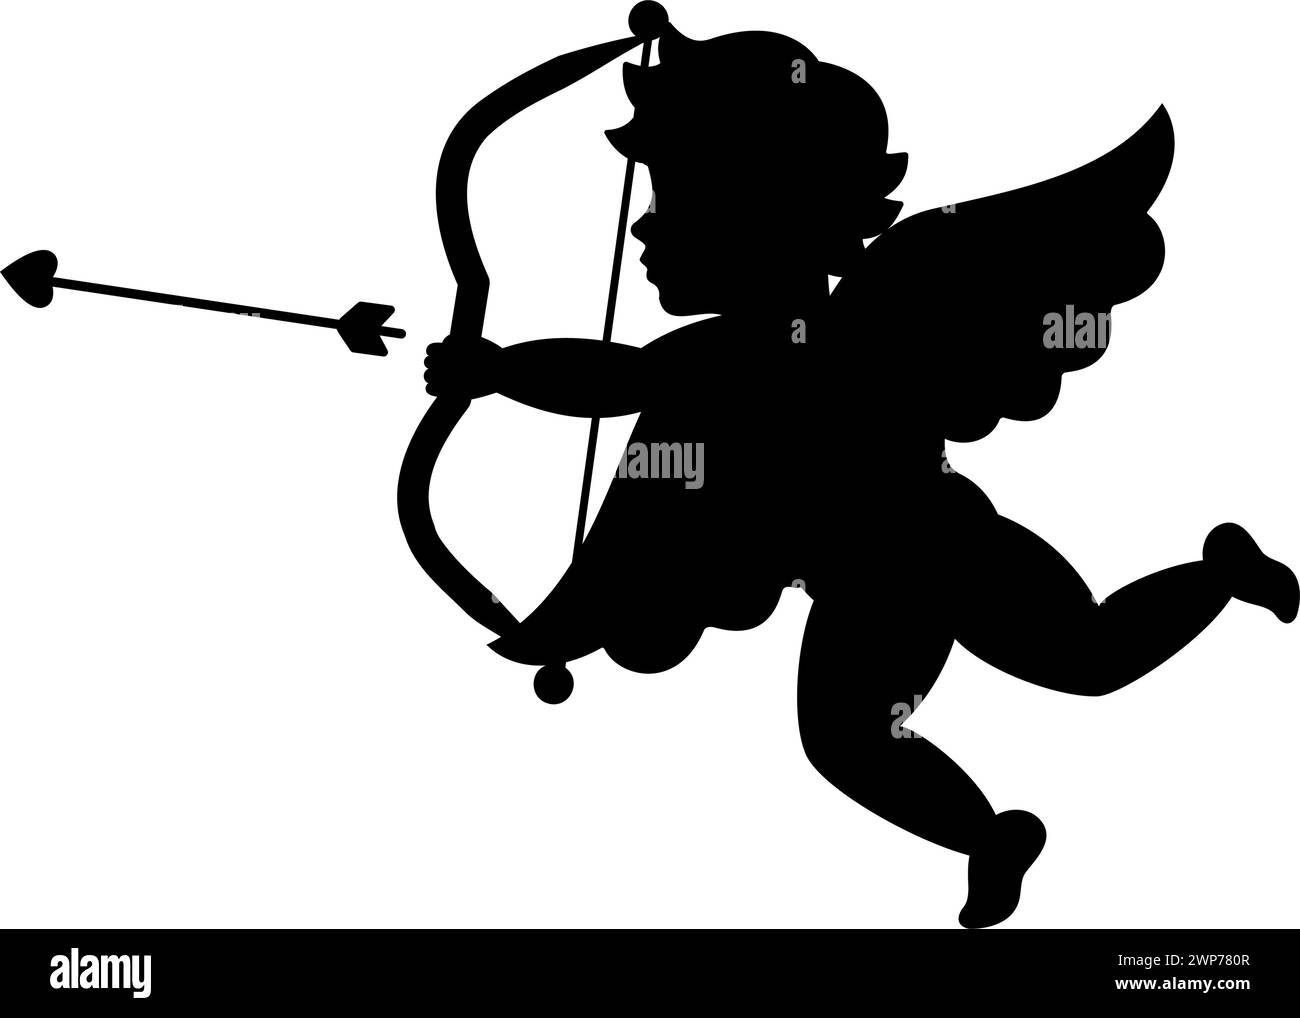 Cupid Aiming A Bow And Arrow Cherub Silhouette Valentines Day Love Symbol Vector 8794